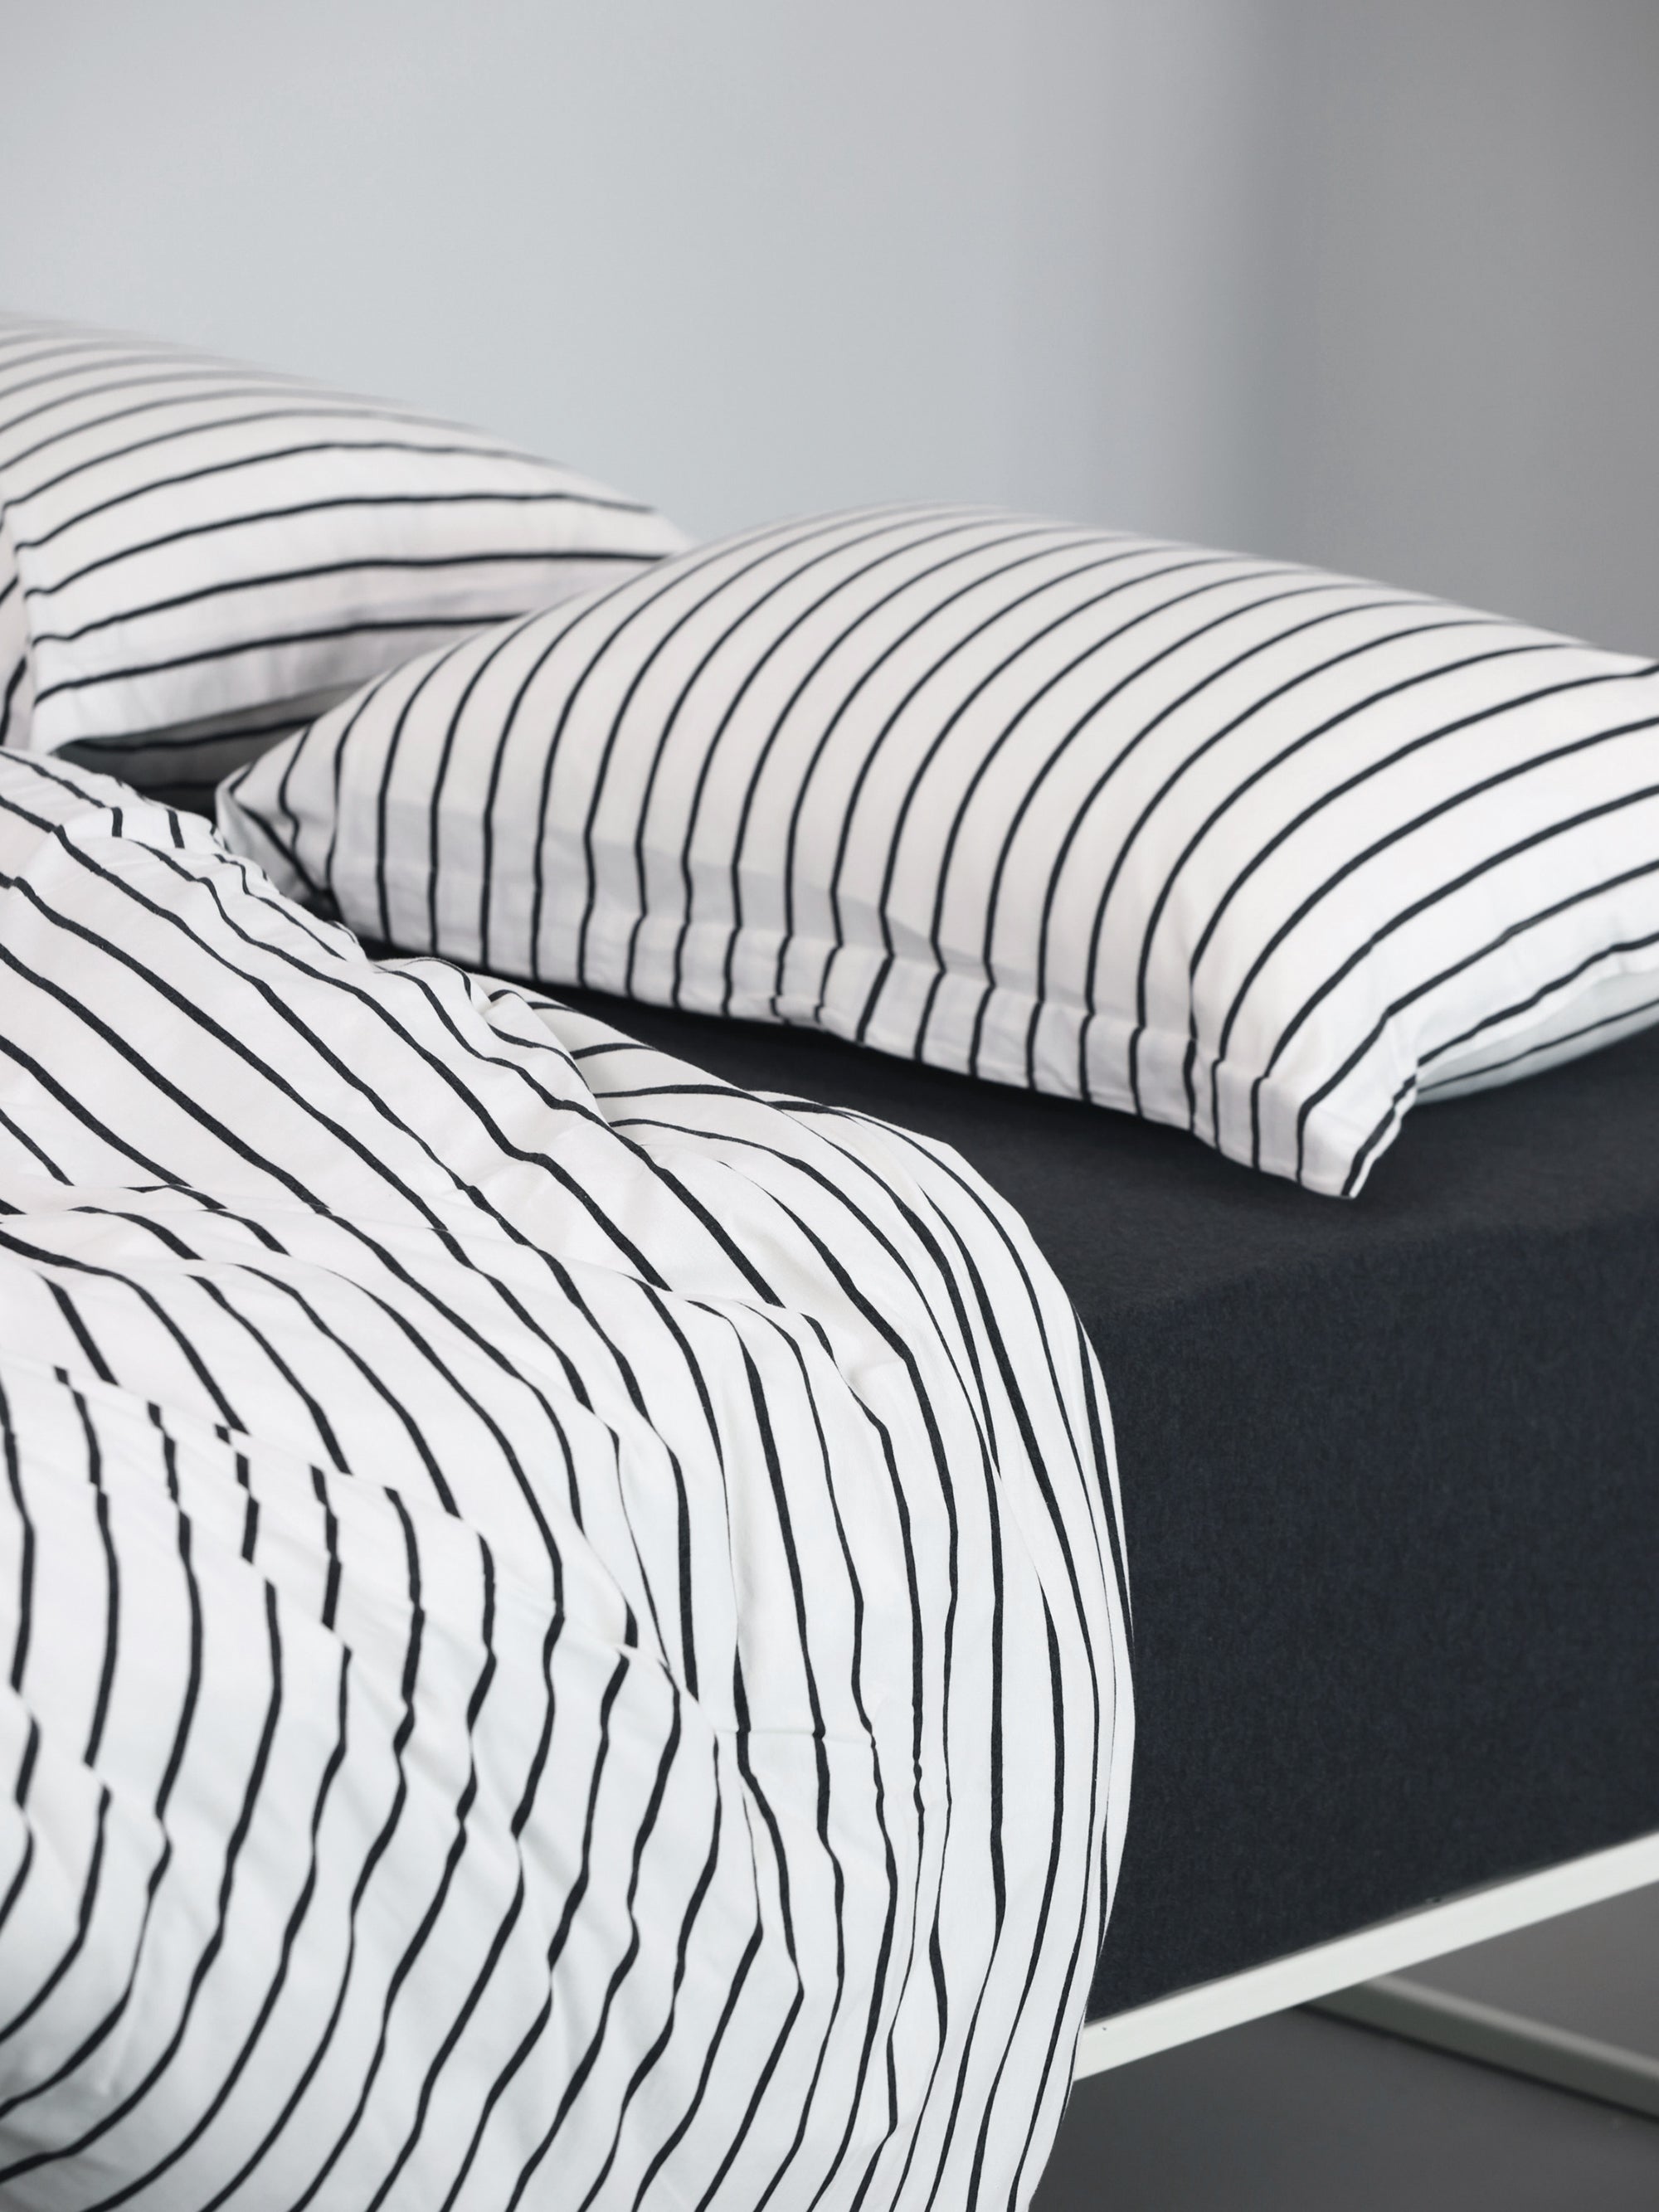 Hey youre on Duvet Set | Stripes product page. Image:  Twin / light gray stripes duvet insert, jersey sheet and 2 pillows with pillowcases on a white frame bed 